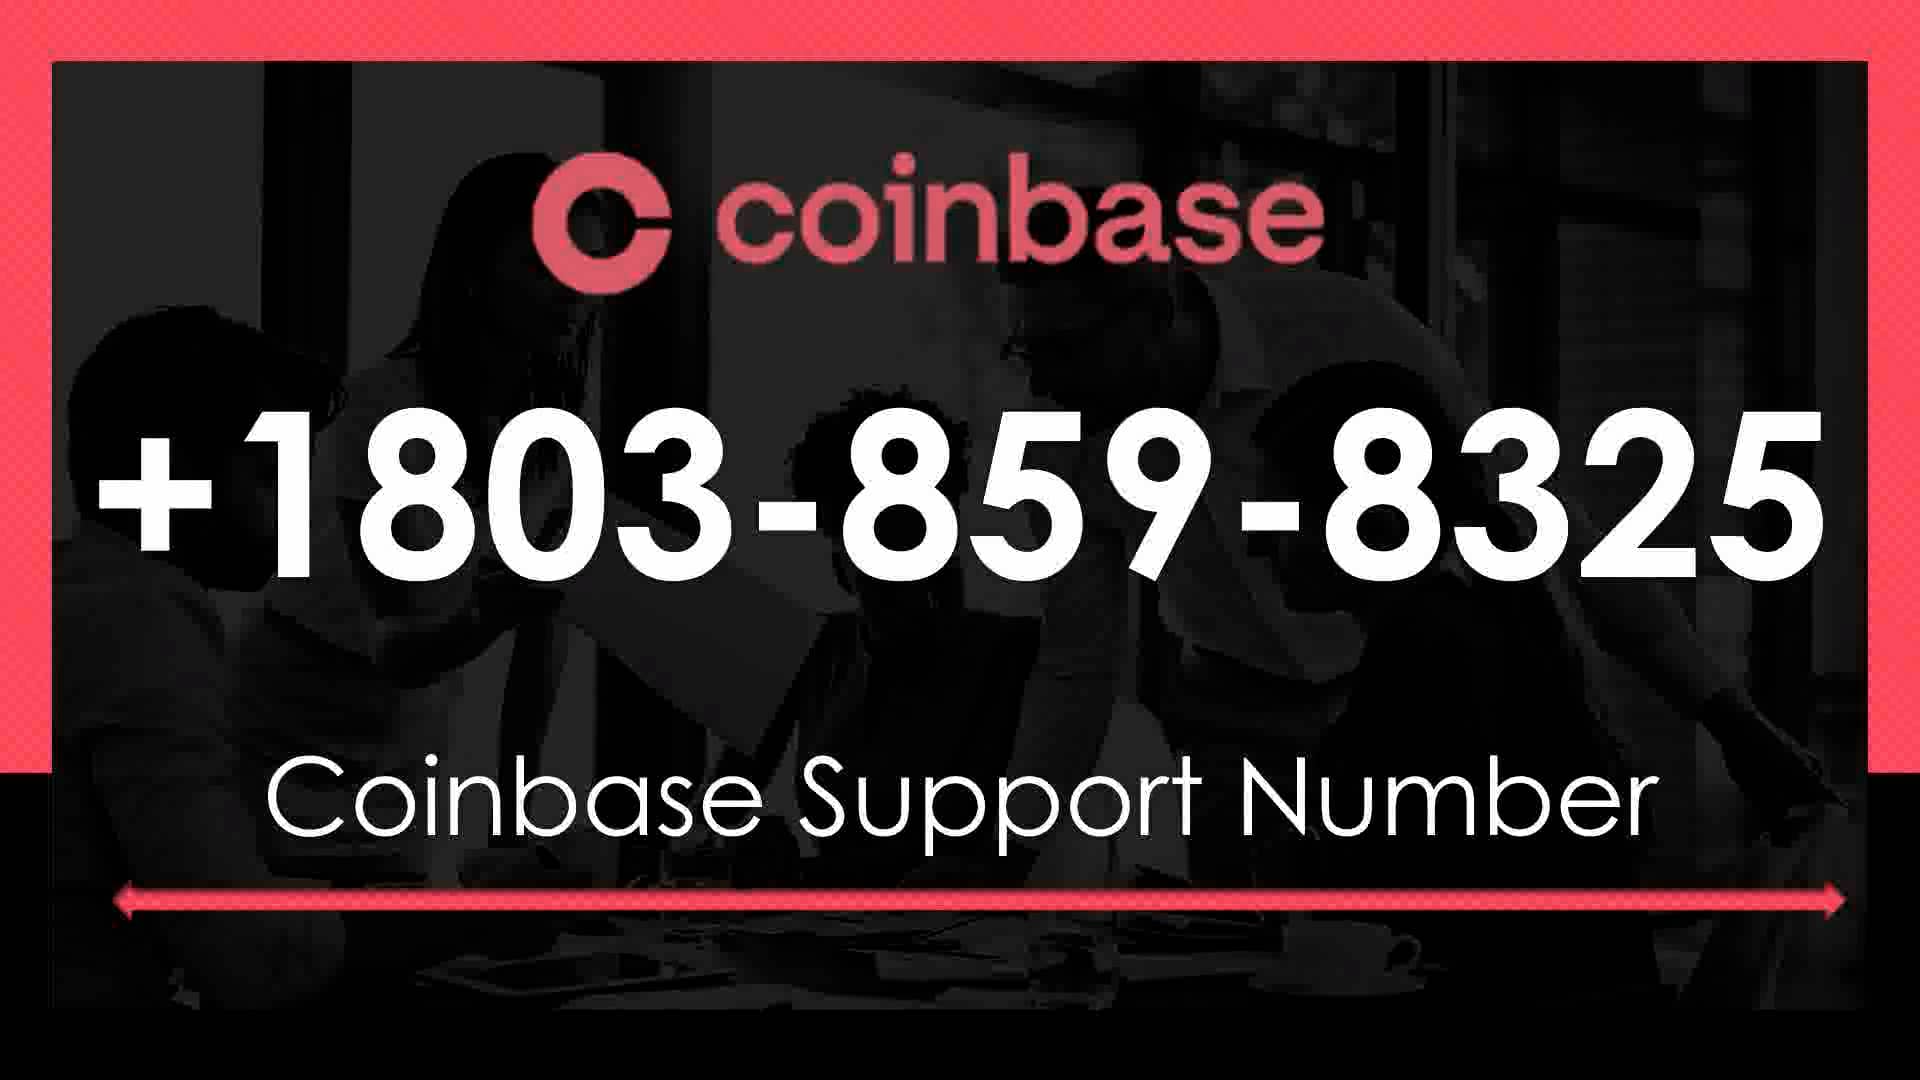 Coinbase Supp0rt Number +1+803+859+8325+ D21$ (85) on Vimeo